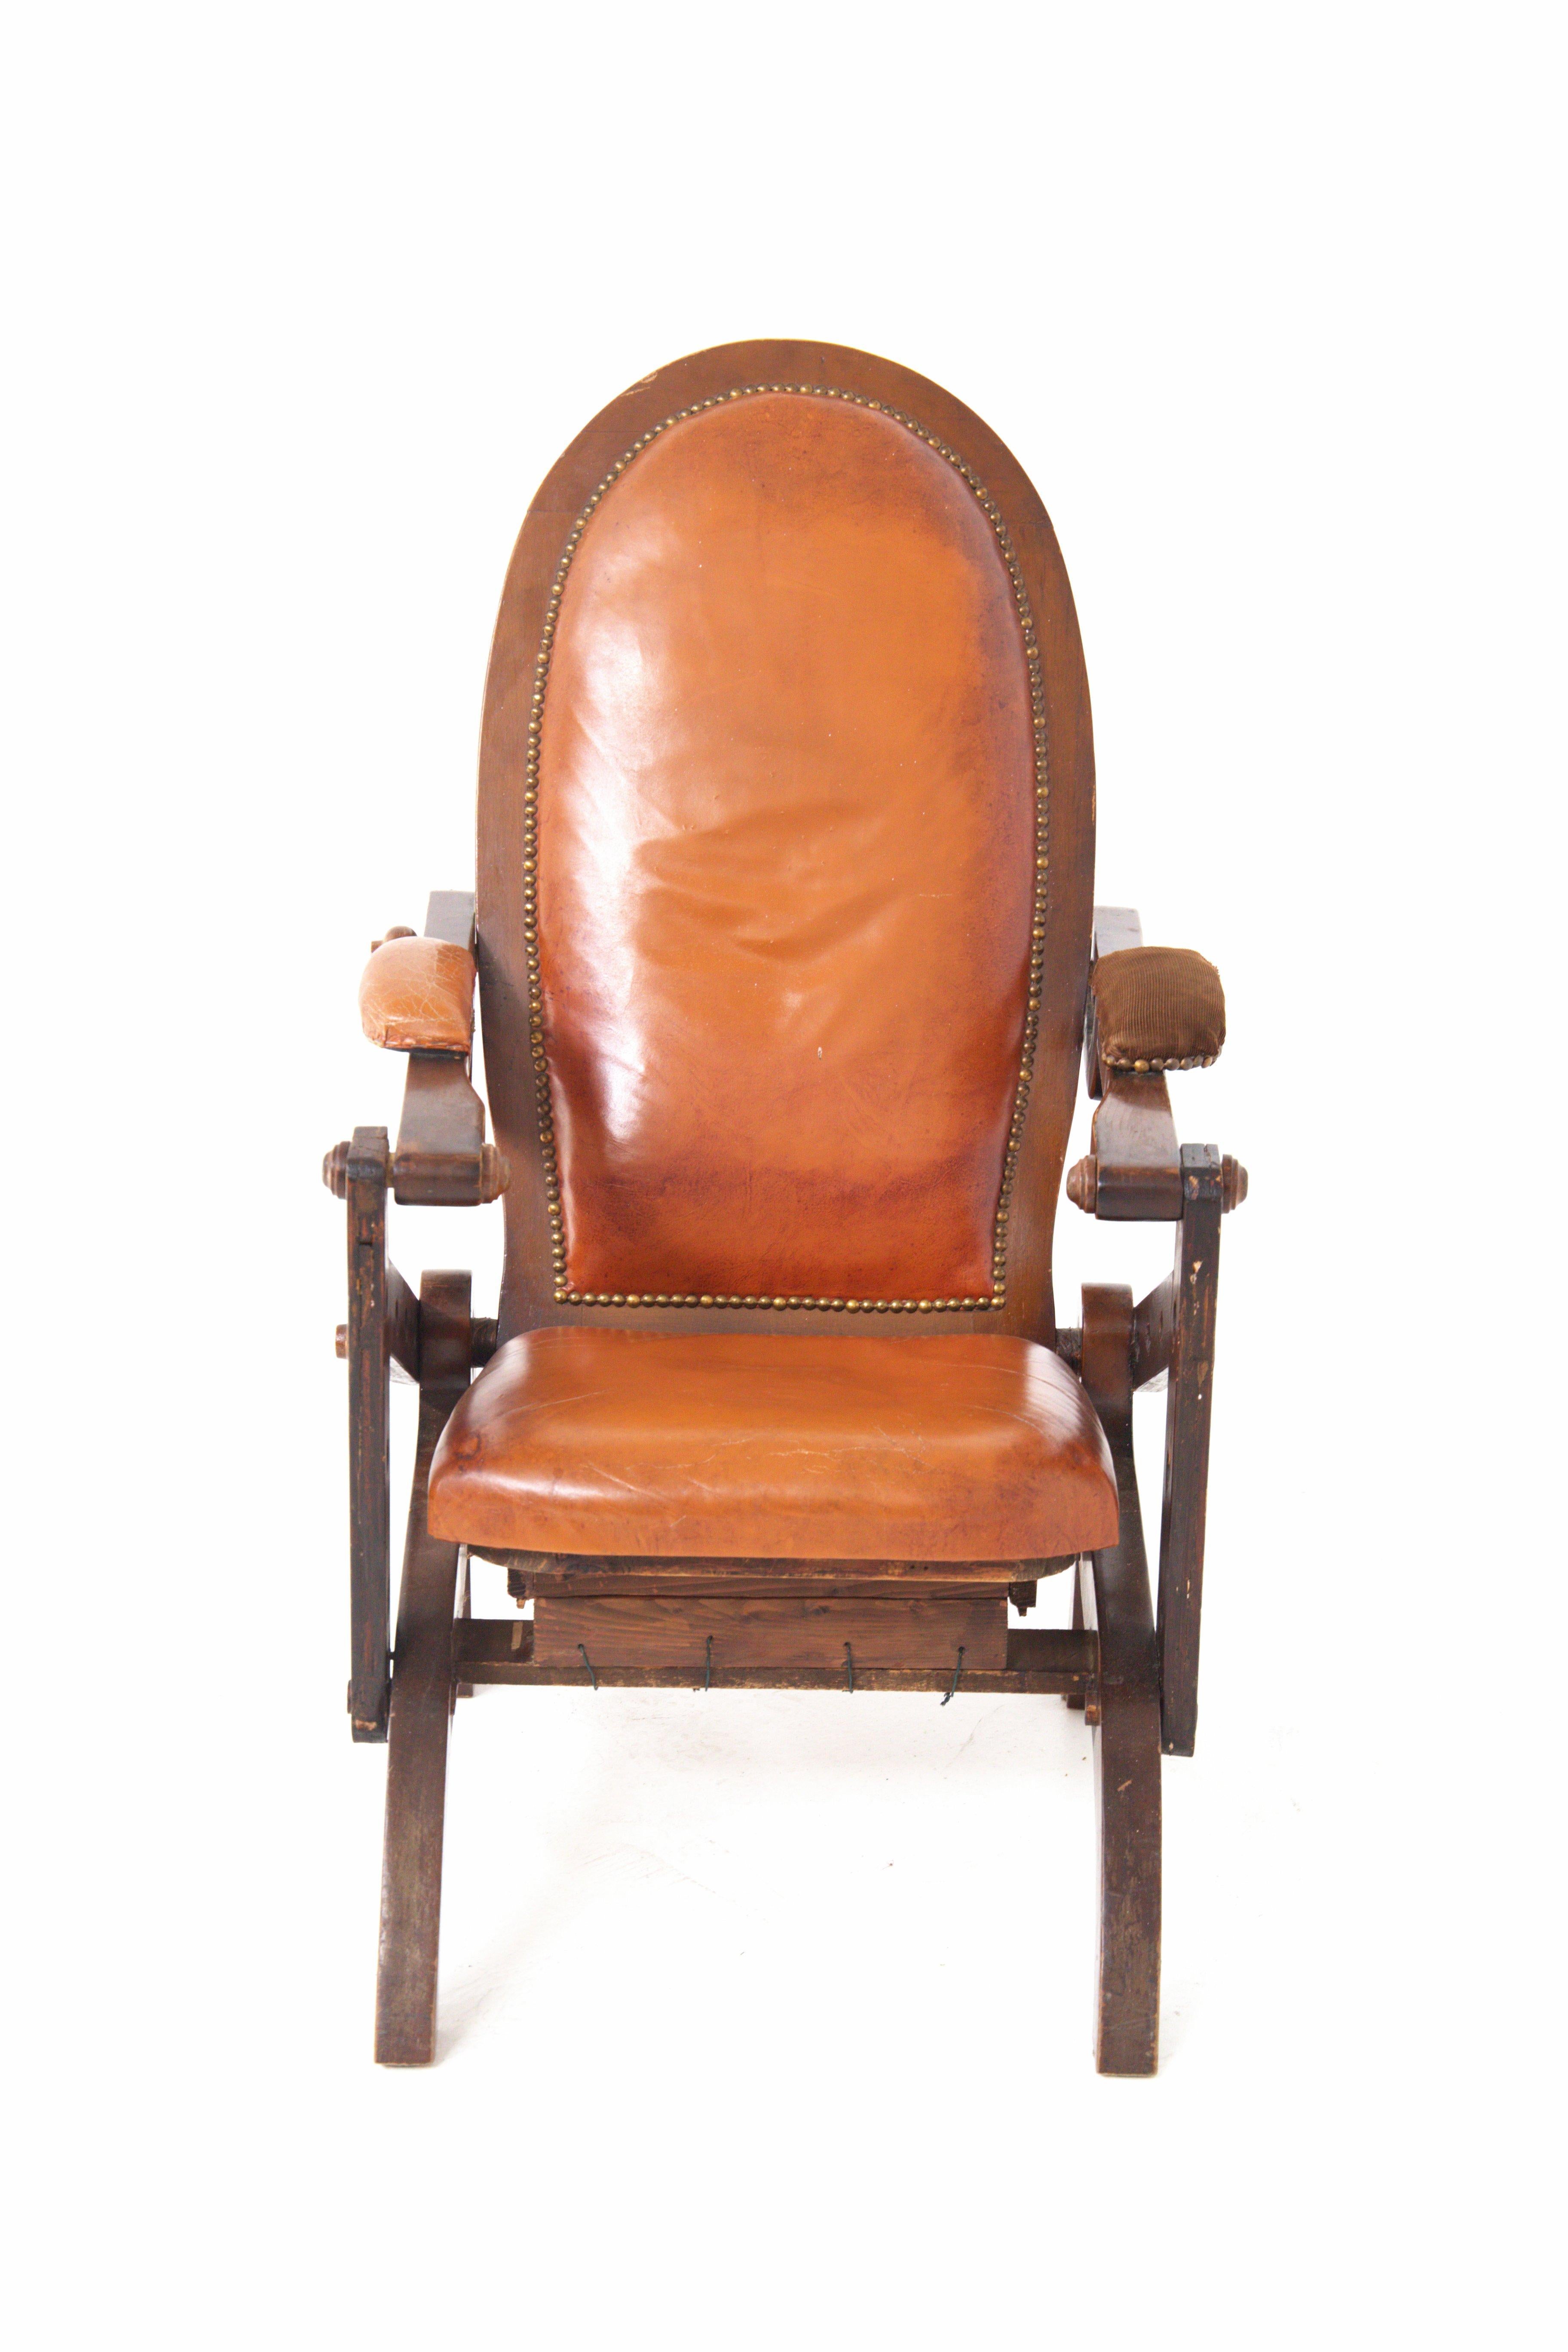 A splendid antique Italian rustic wood and leather armchair produced in the 19th century.
There are four wooden legs for support, the two rear ones are curvy but smooth, the front ones are slightly bent.
The rear legs rise to frame the backrest,